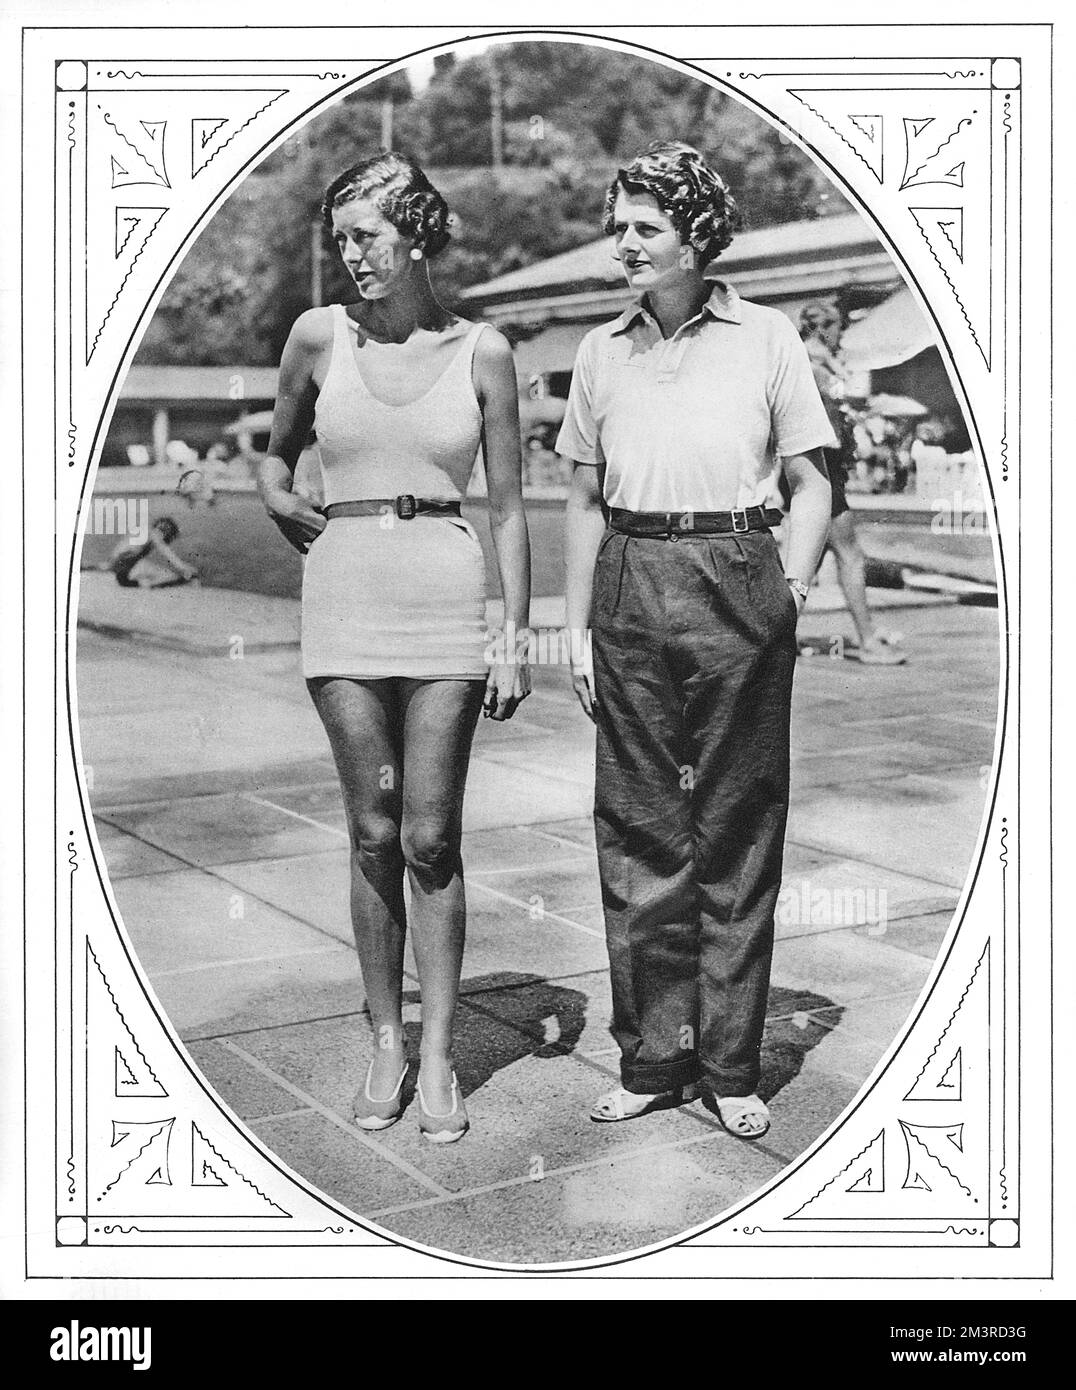 A snapshot from Monte Carlo beach showing two 'well-known beauties - one sunburned quite brown and the other still white-skinned.'  The Hon. Mrs Richard Norton is the tanned one in the bathing suit, due to the fact that she had been staying in the Riviera for some time and the new arrival, with her 'cream-and-roses complexion' is the Countess of Brecknock, looking chic in a polo shirt, loose trousers and sandals.     Date: 1932 Stock Photo